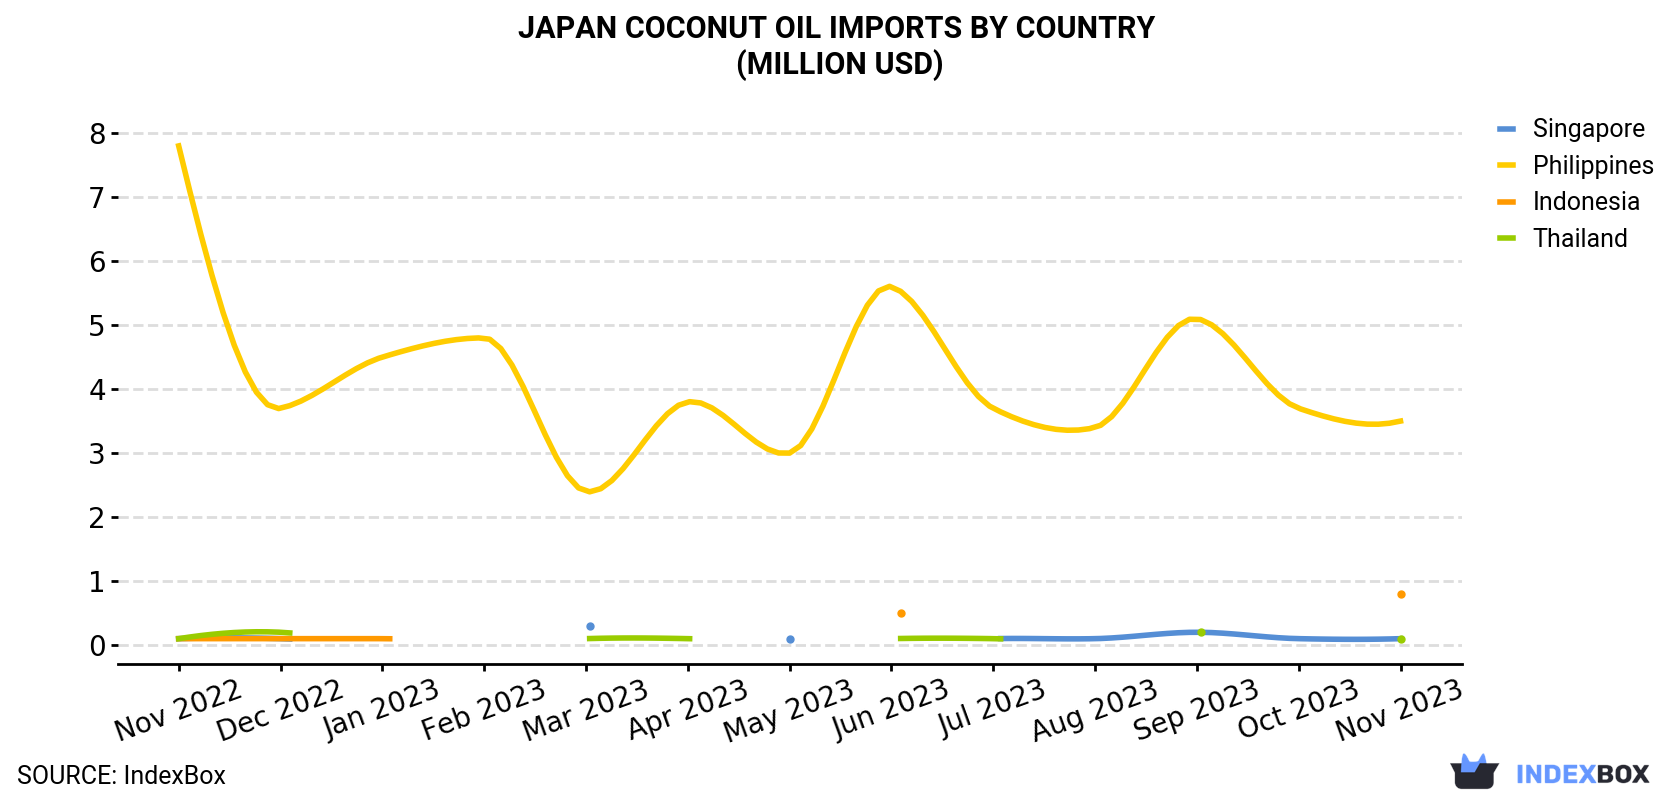 Japan Coconut Oil Imports By Country (Million USD)